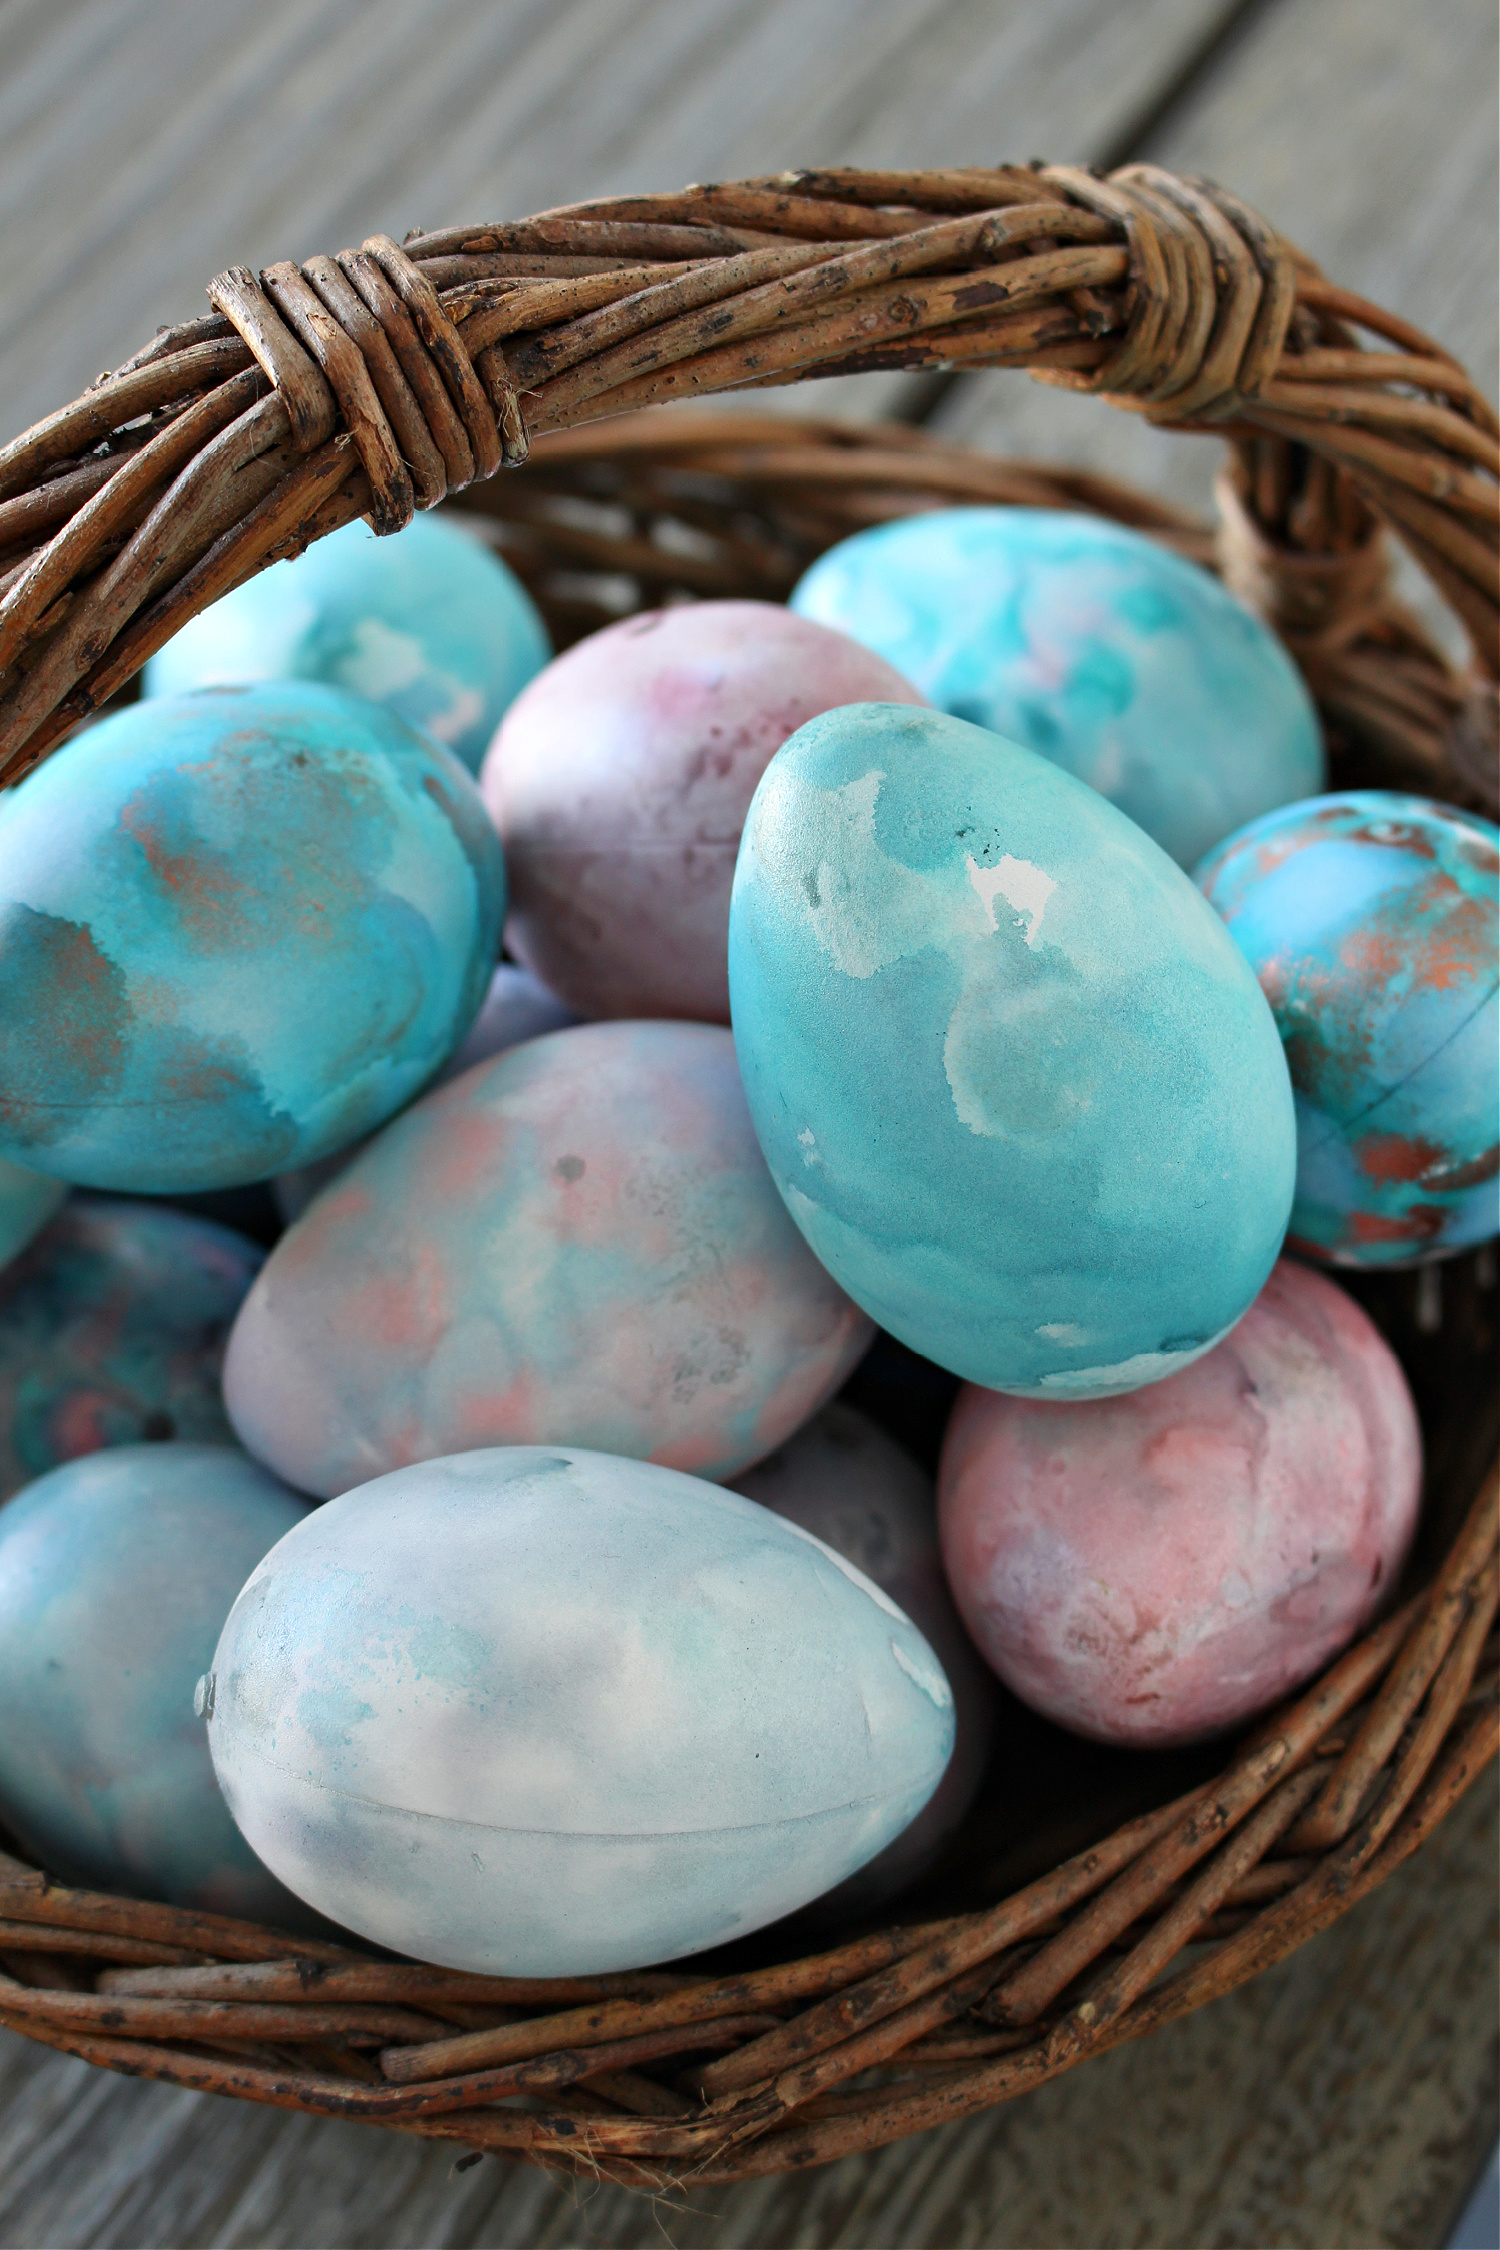 Easter Egg Decorating Idea: Marbled Eggs